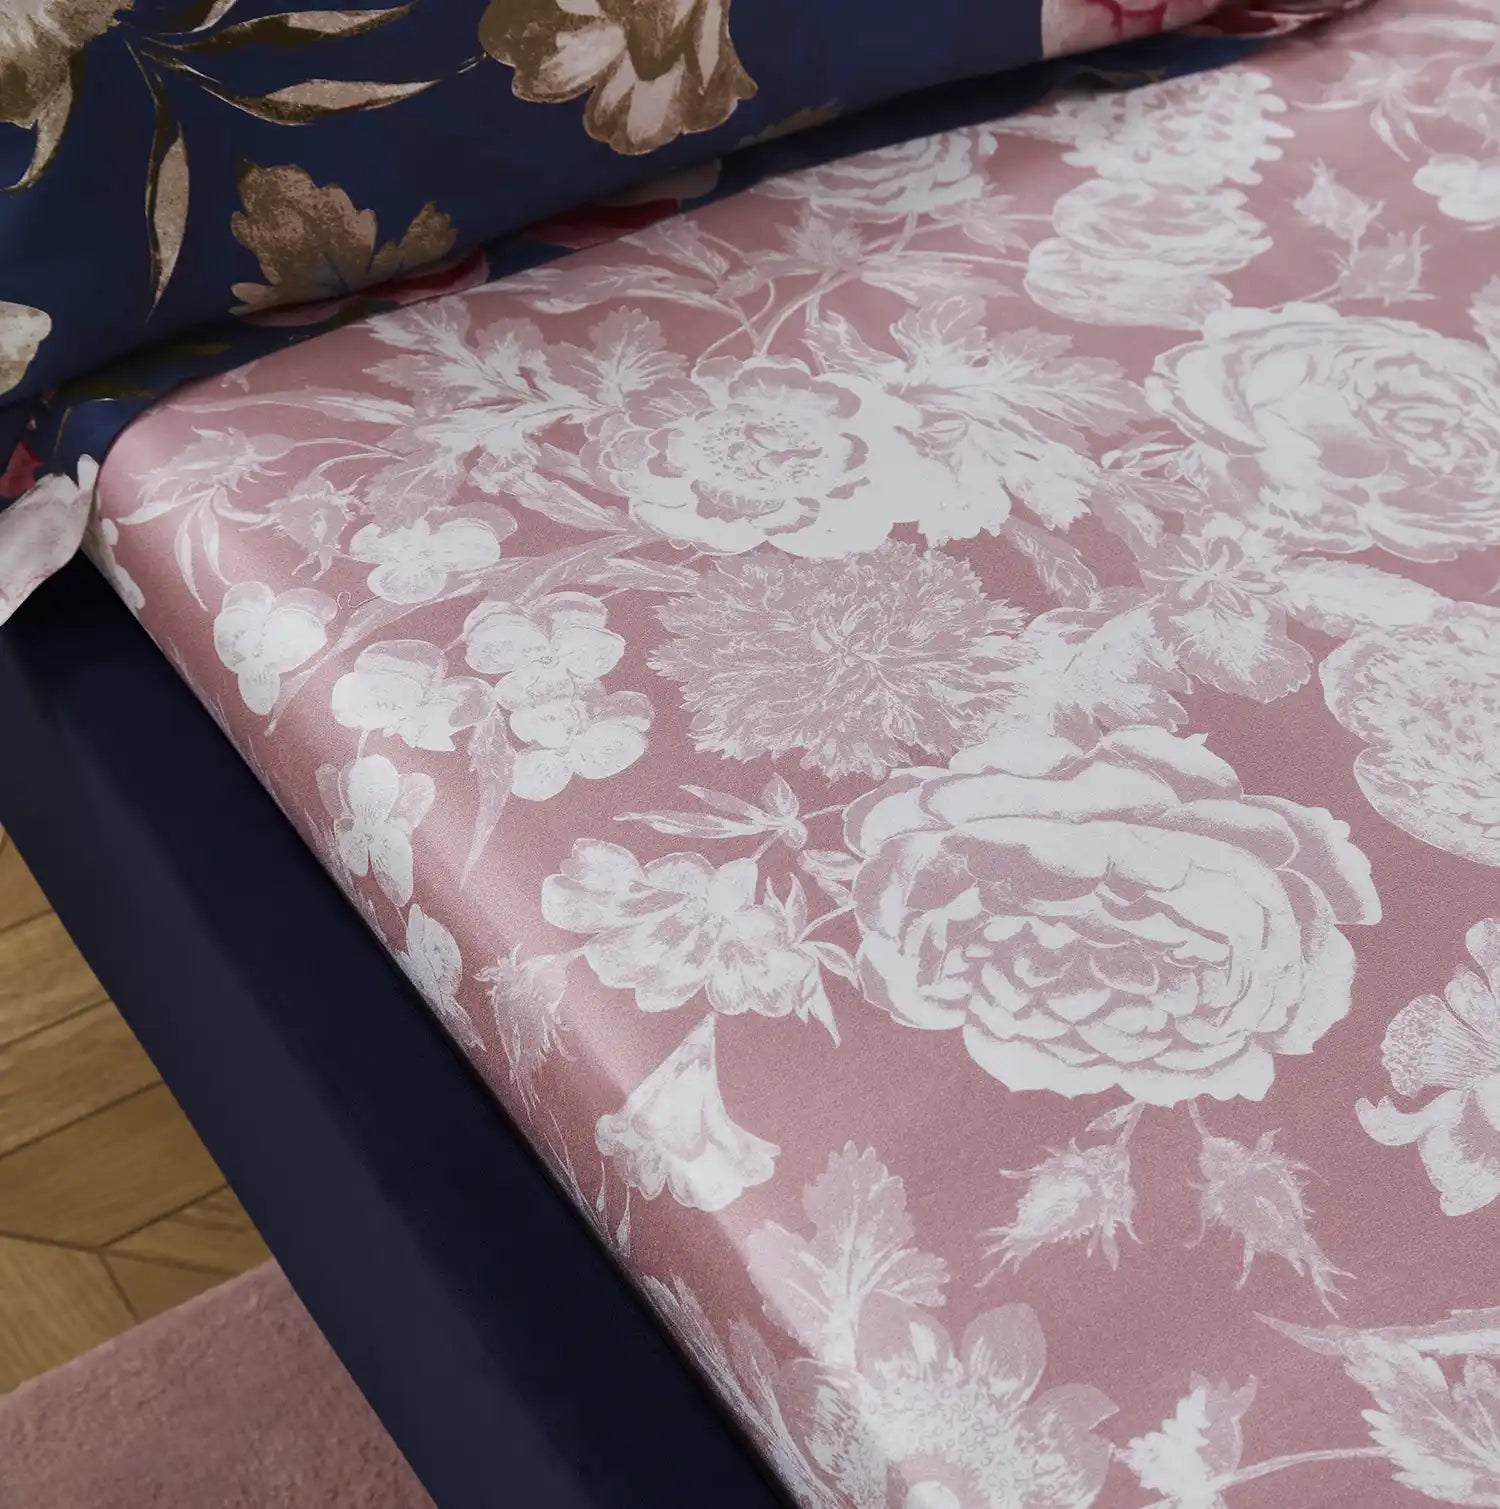 Dorma Constance Floral 100% Cotton Fitted Sheet - Navy floral 1 Shaws Department Stores